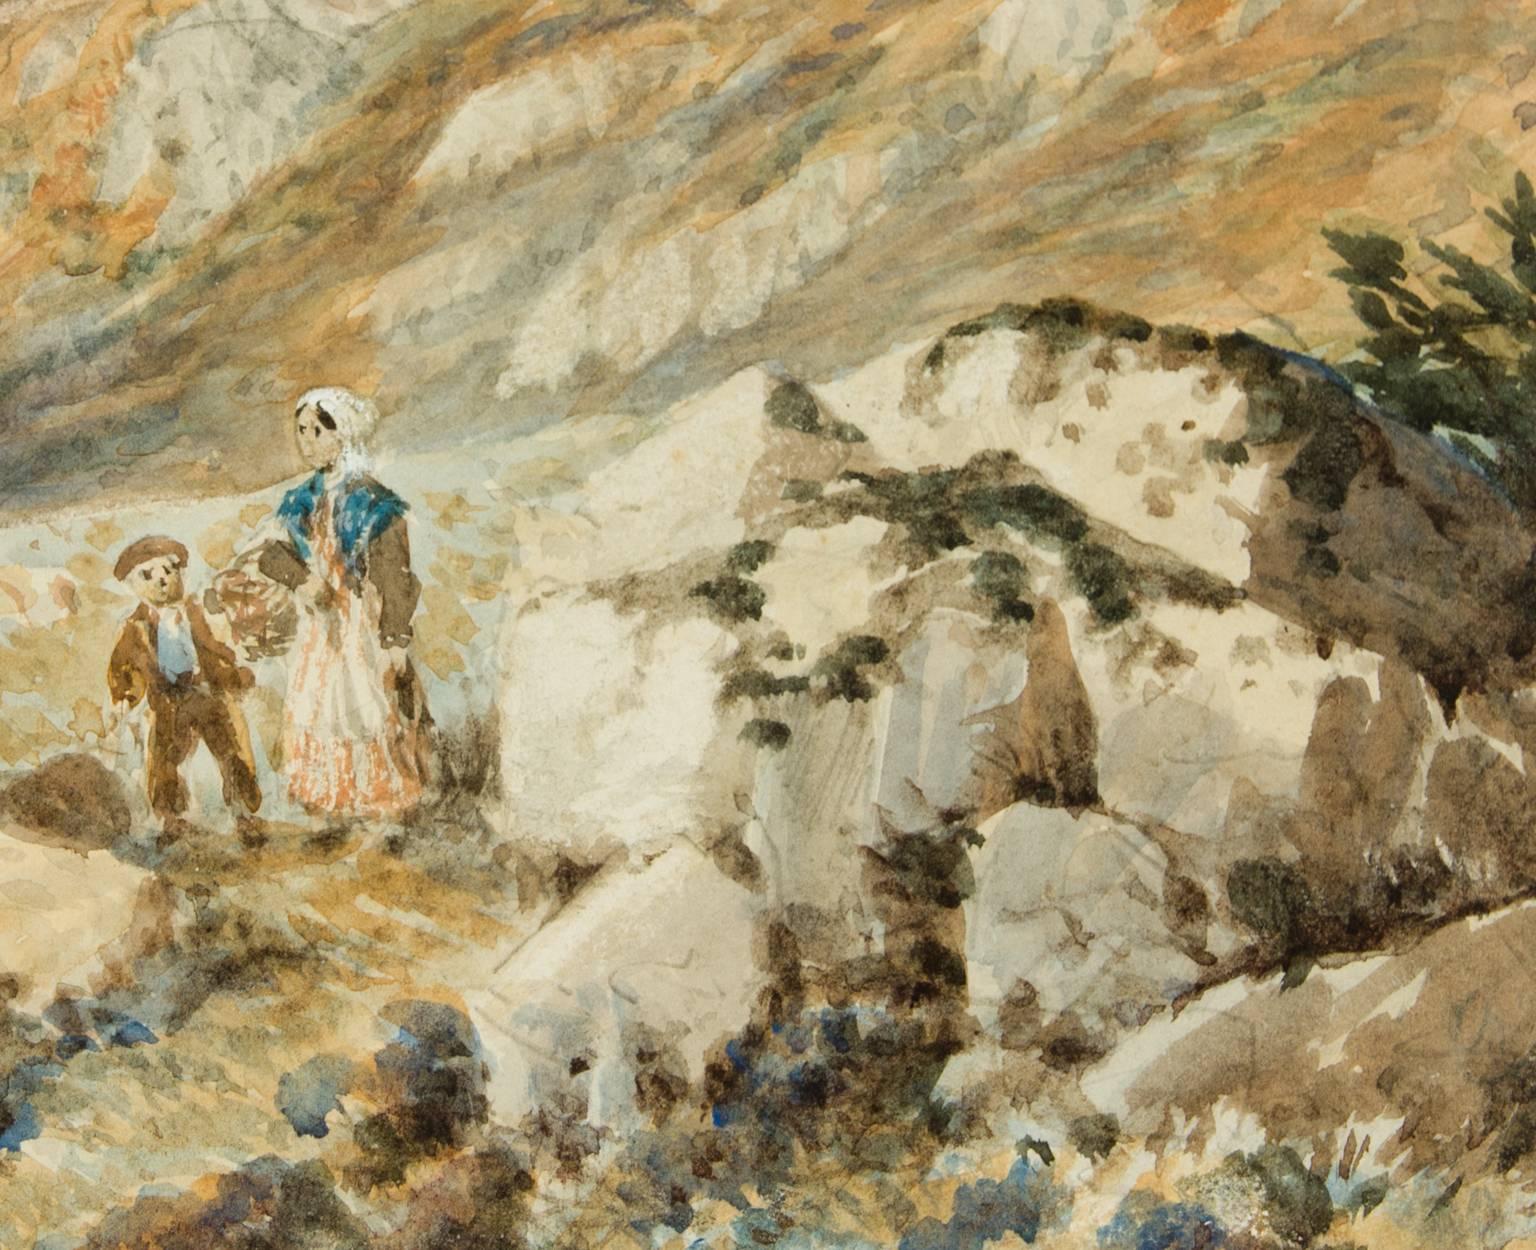 Large English School 19th Century Watercolour - Figures in Highland Landscape - Realist Painting by Unknown